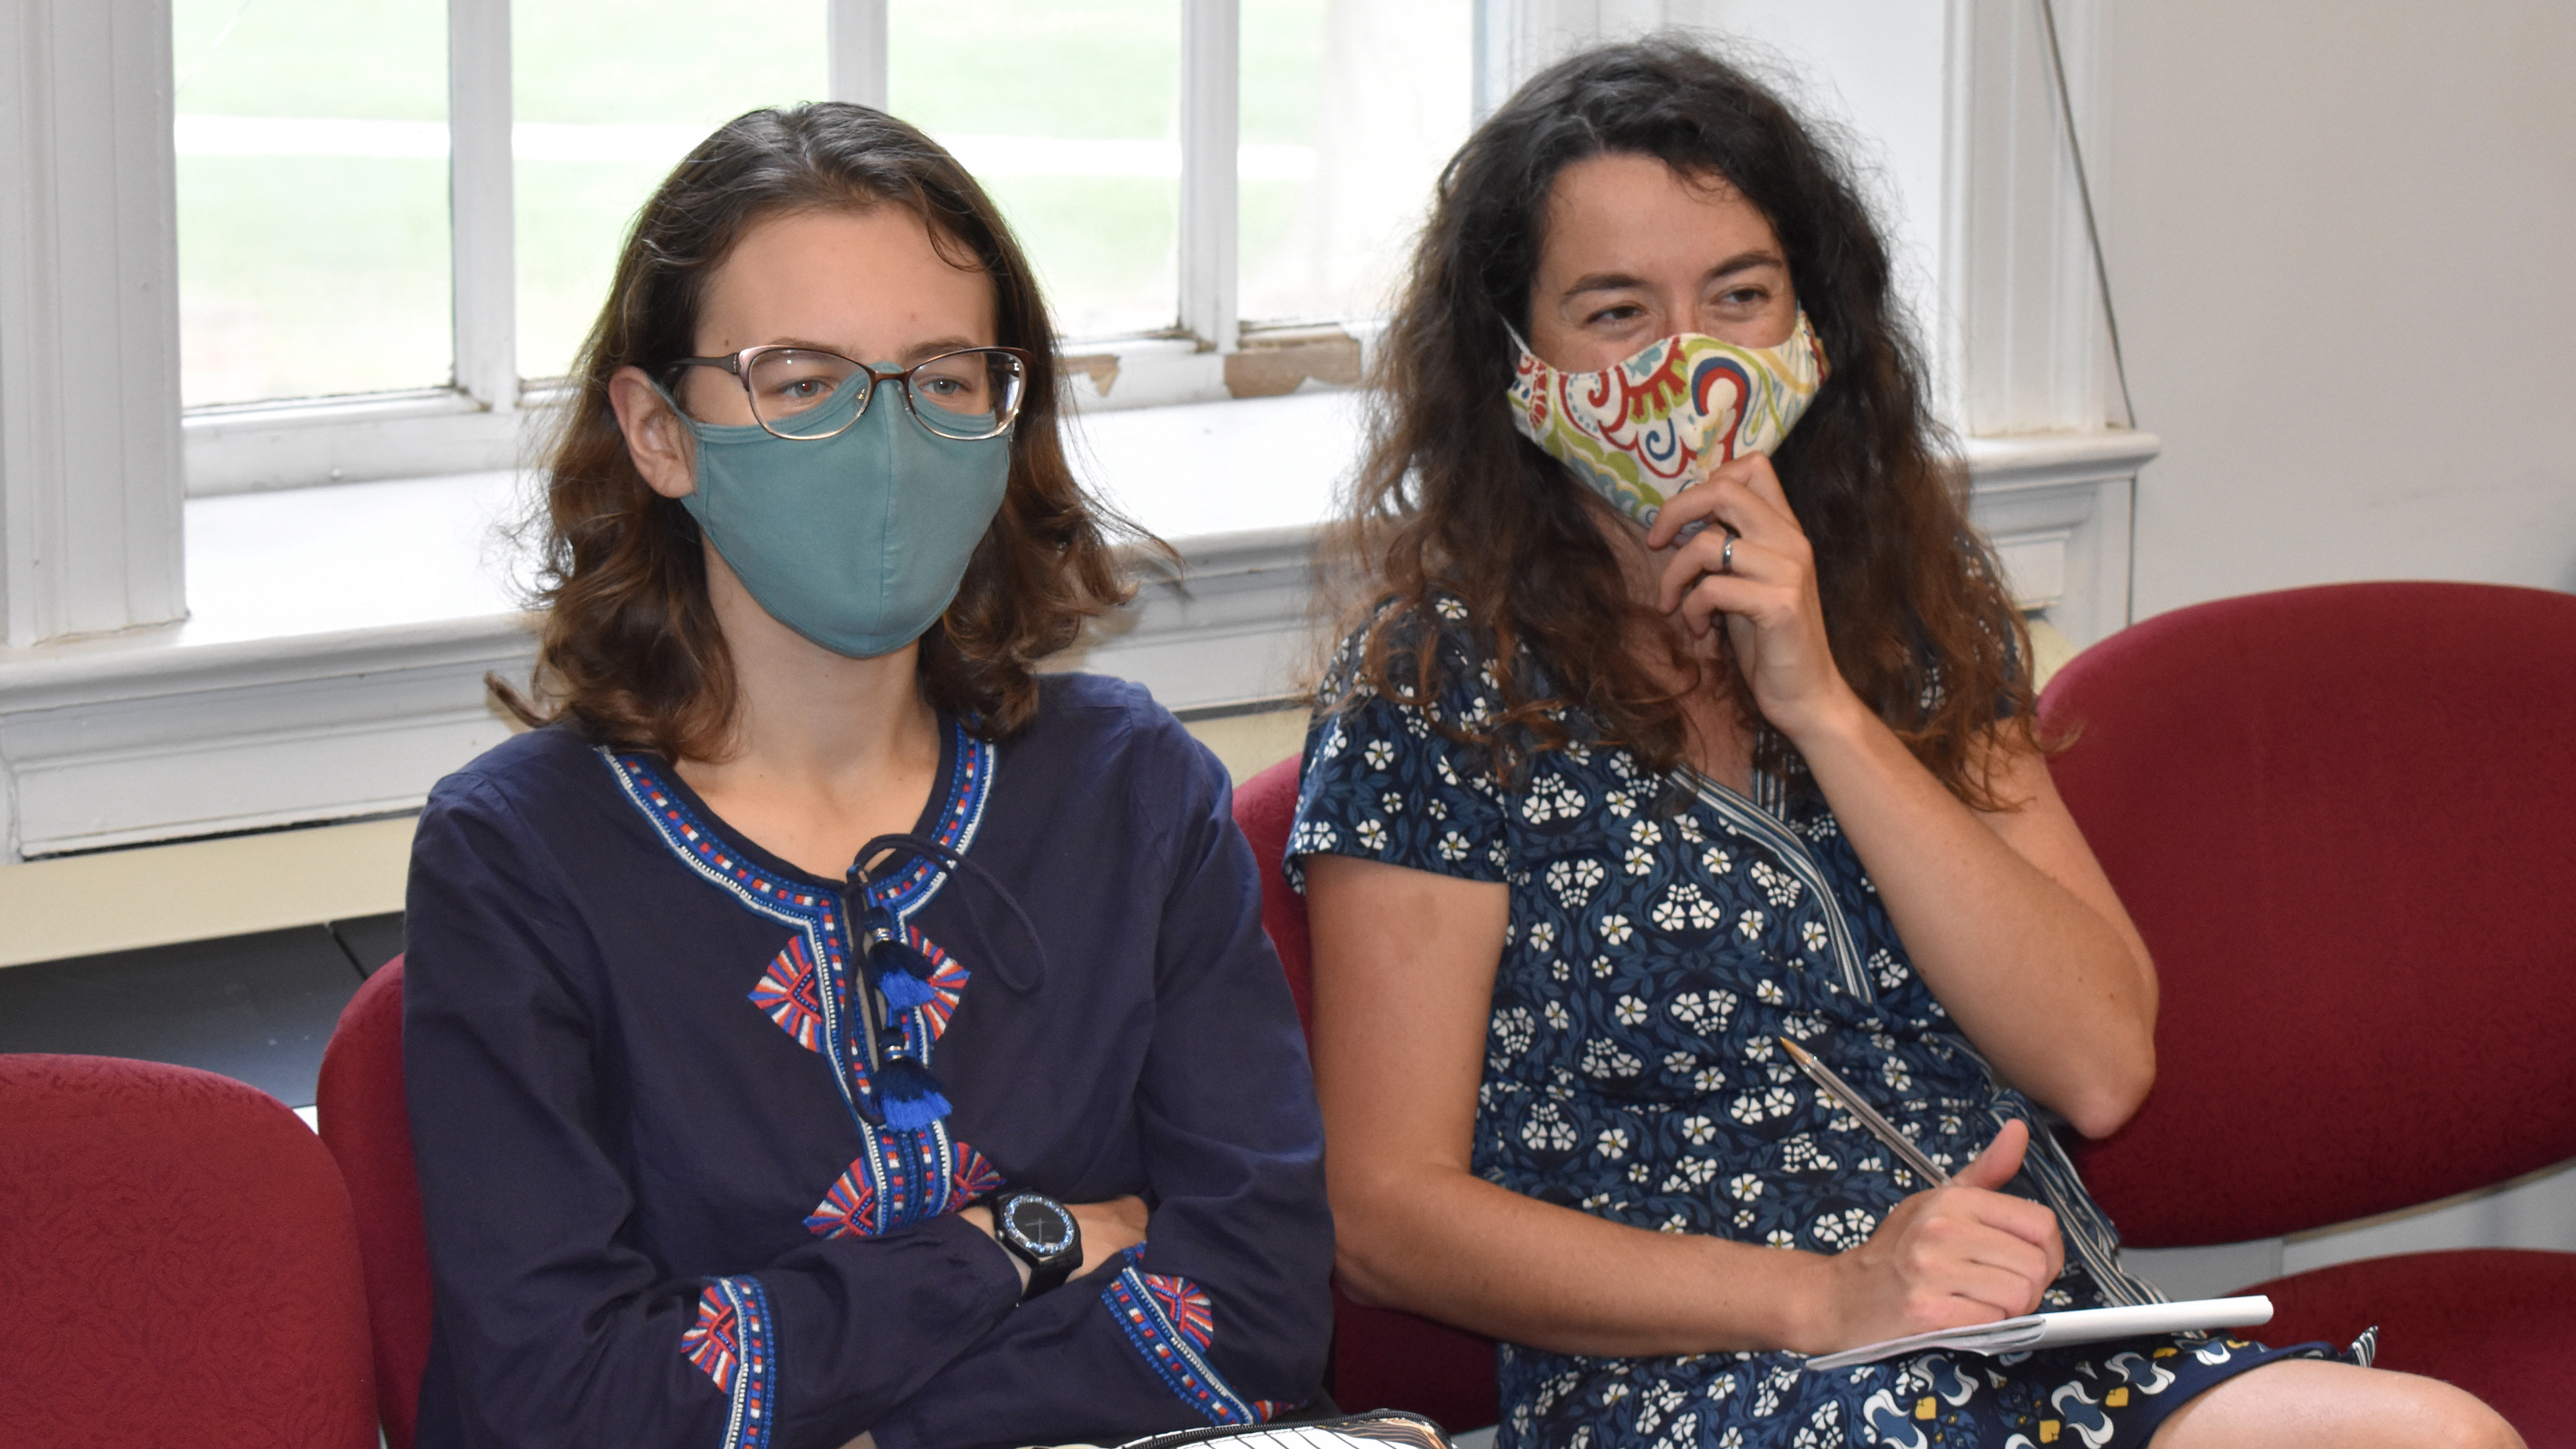 PhD student Polina Pleshak sitting next to Professor Ellen Lau, both wearing covid facemasks and looking straight ahead, but smiling